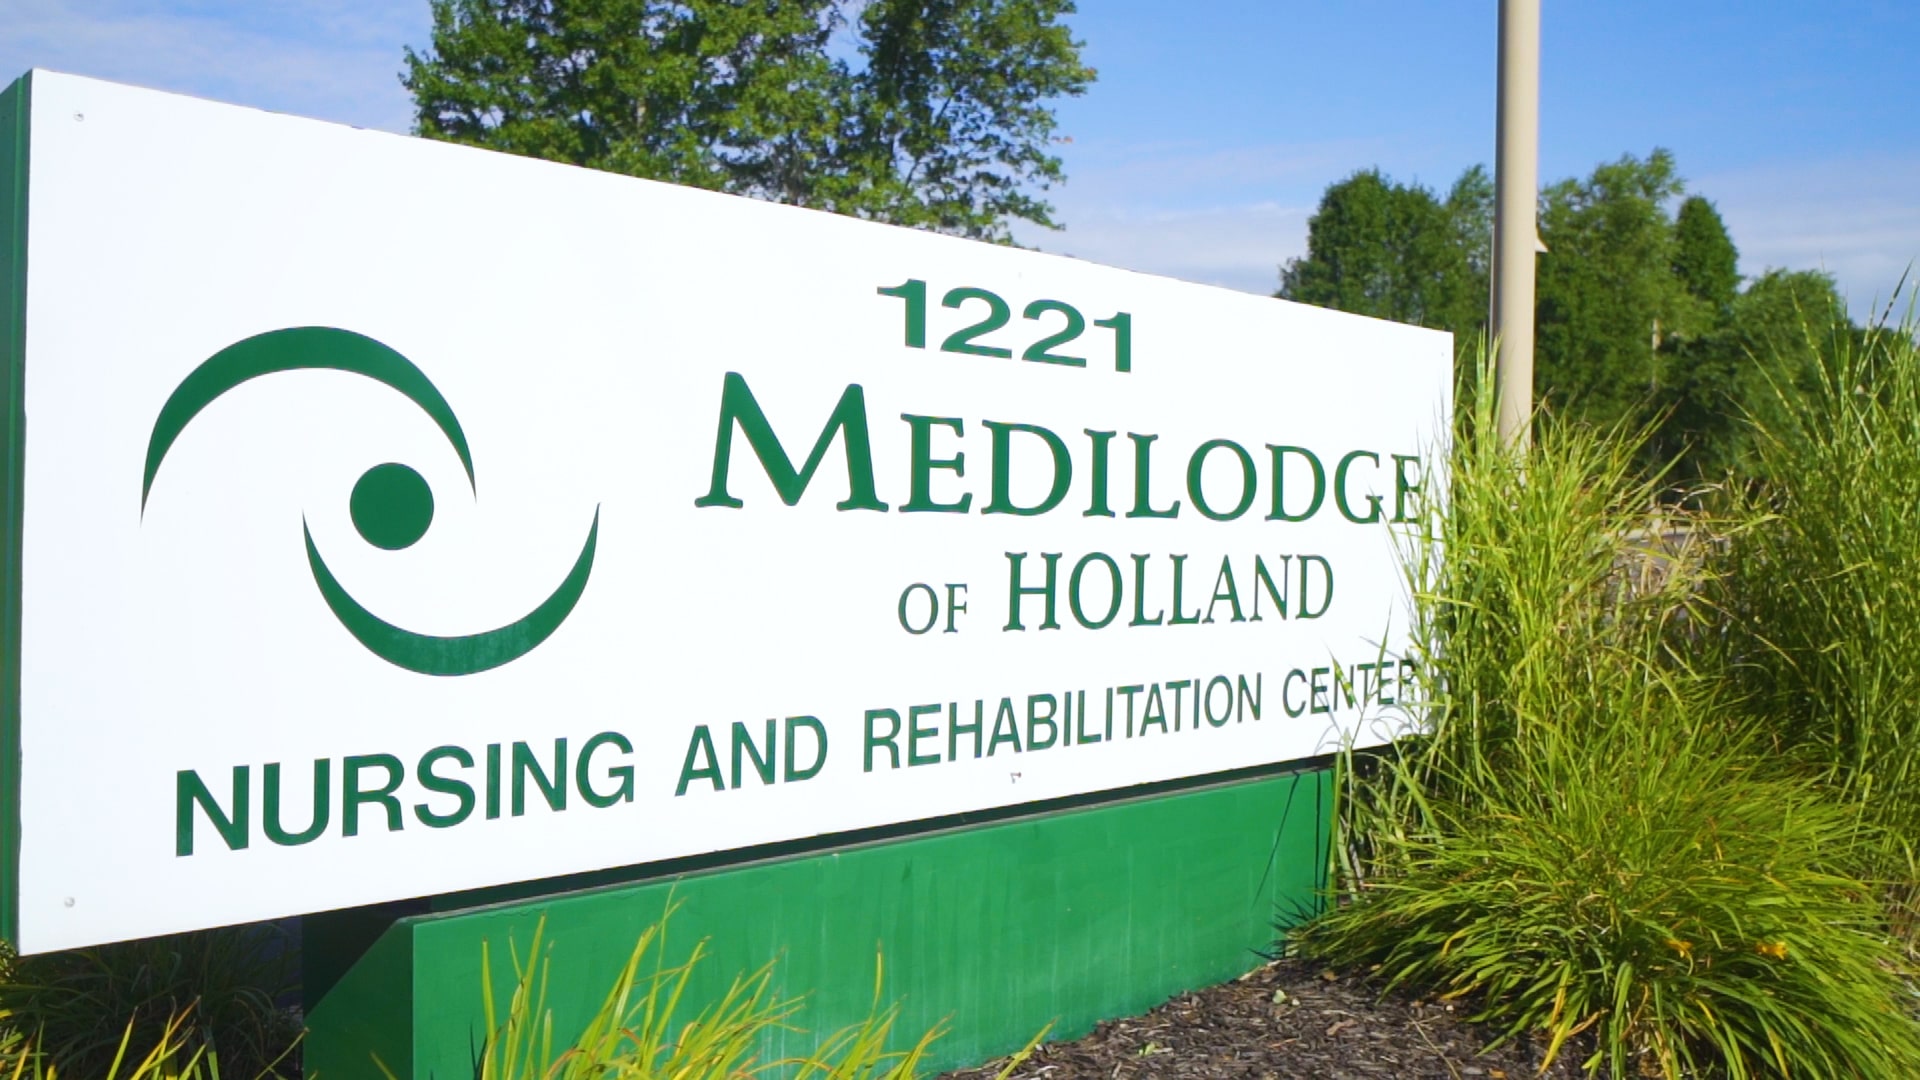 Medilodge of Holland Sign outside the building.